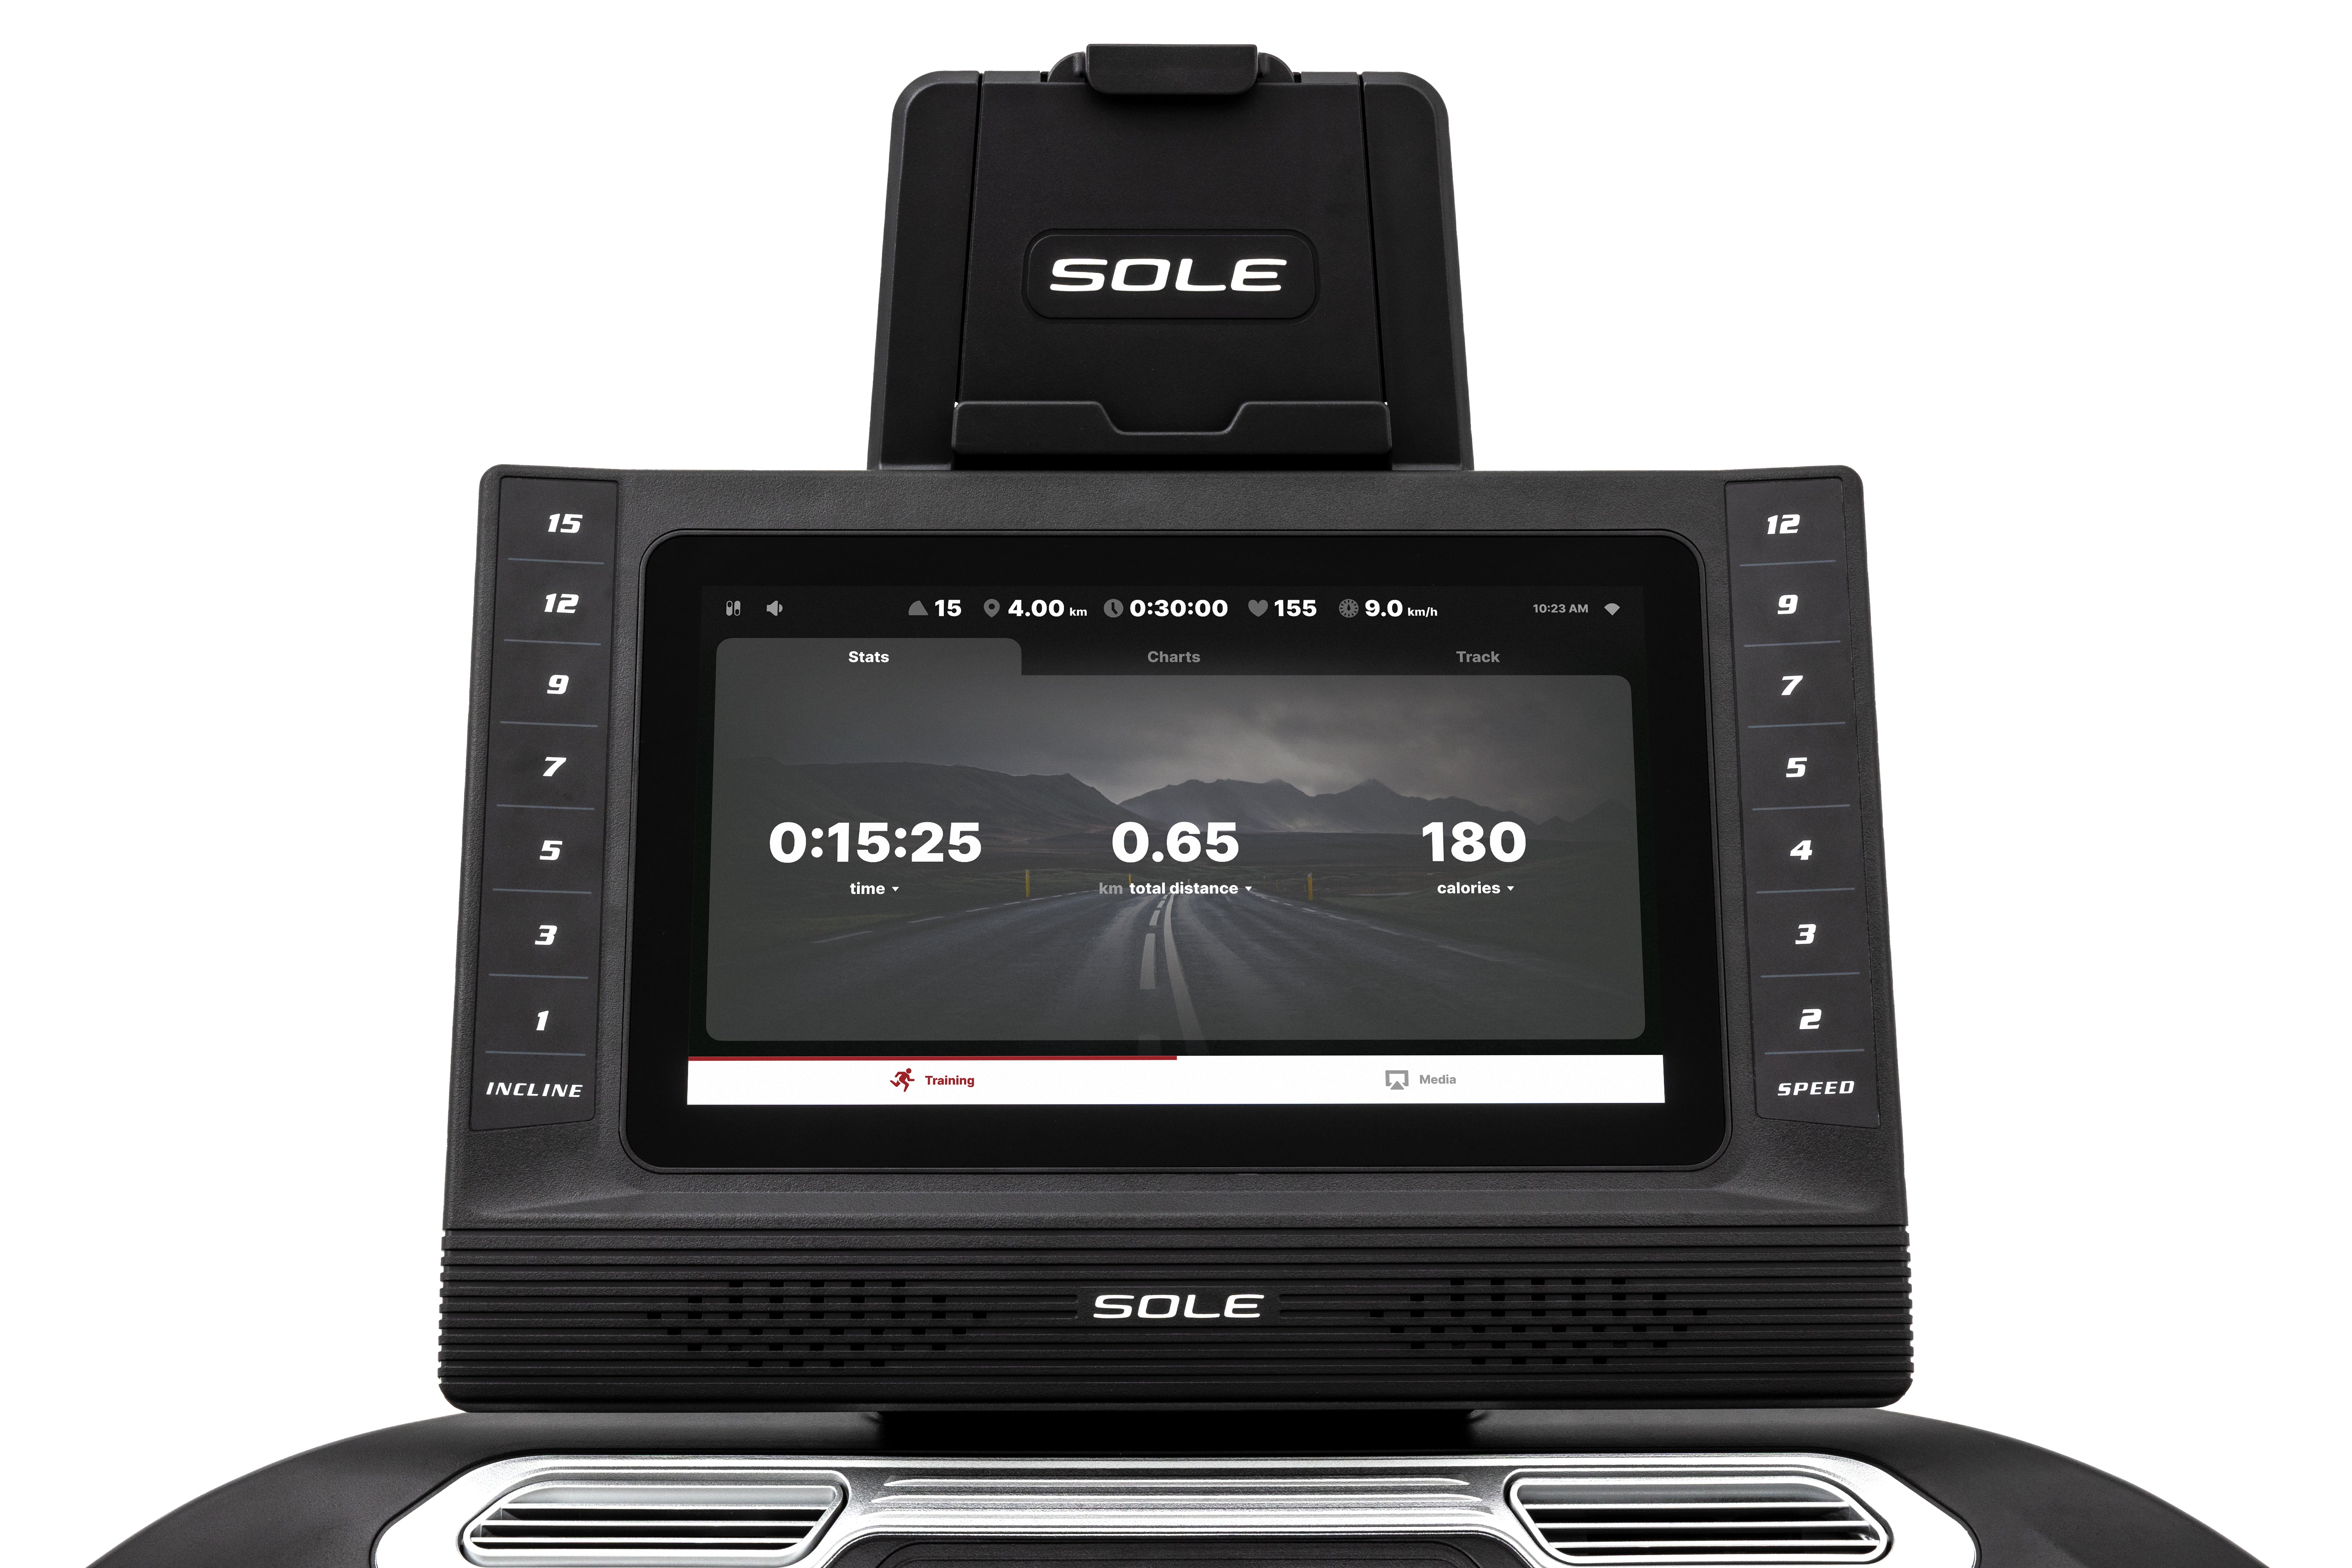 Detailed front view of the Sole ST90 treadmill's control panel, showing a digital screen with a virtual running track, workout stats, and the SOLE branding on the tablet holder and base, set against a white background.